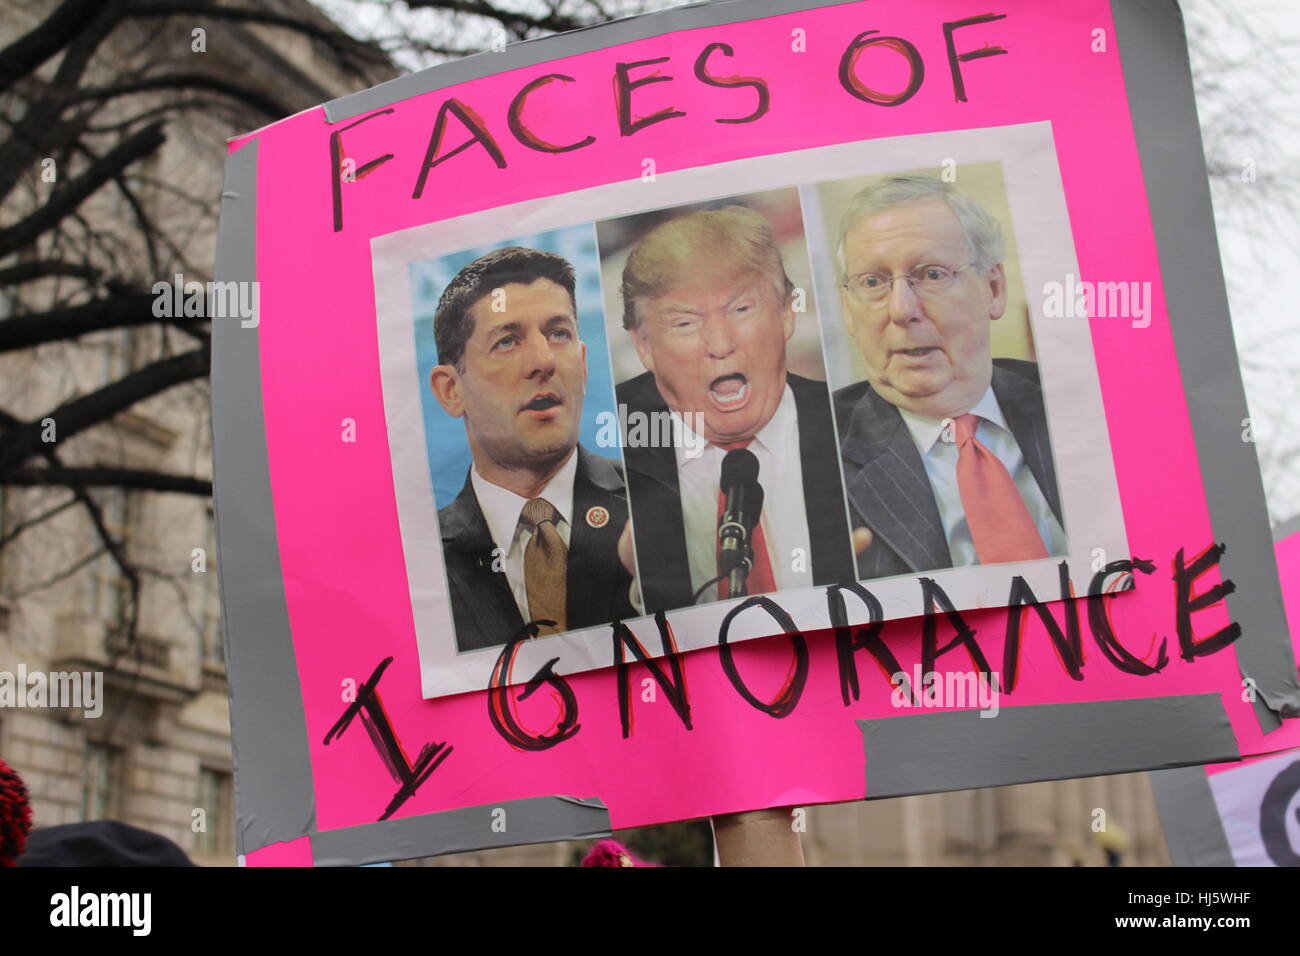 District of Columbia, USA. 21 Jan, 2017. A sign with pictures of House Speaker Paul Ryan, President Donald Trump, and Kentucky Senator Mitch McConnell in between the words 'FACES OF IGNORANCE'. Stock Photo